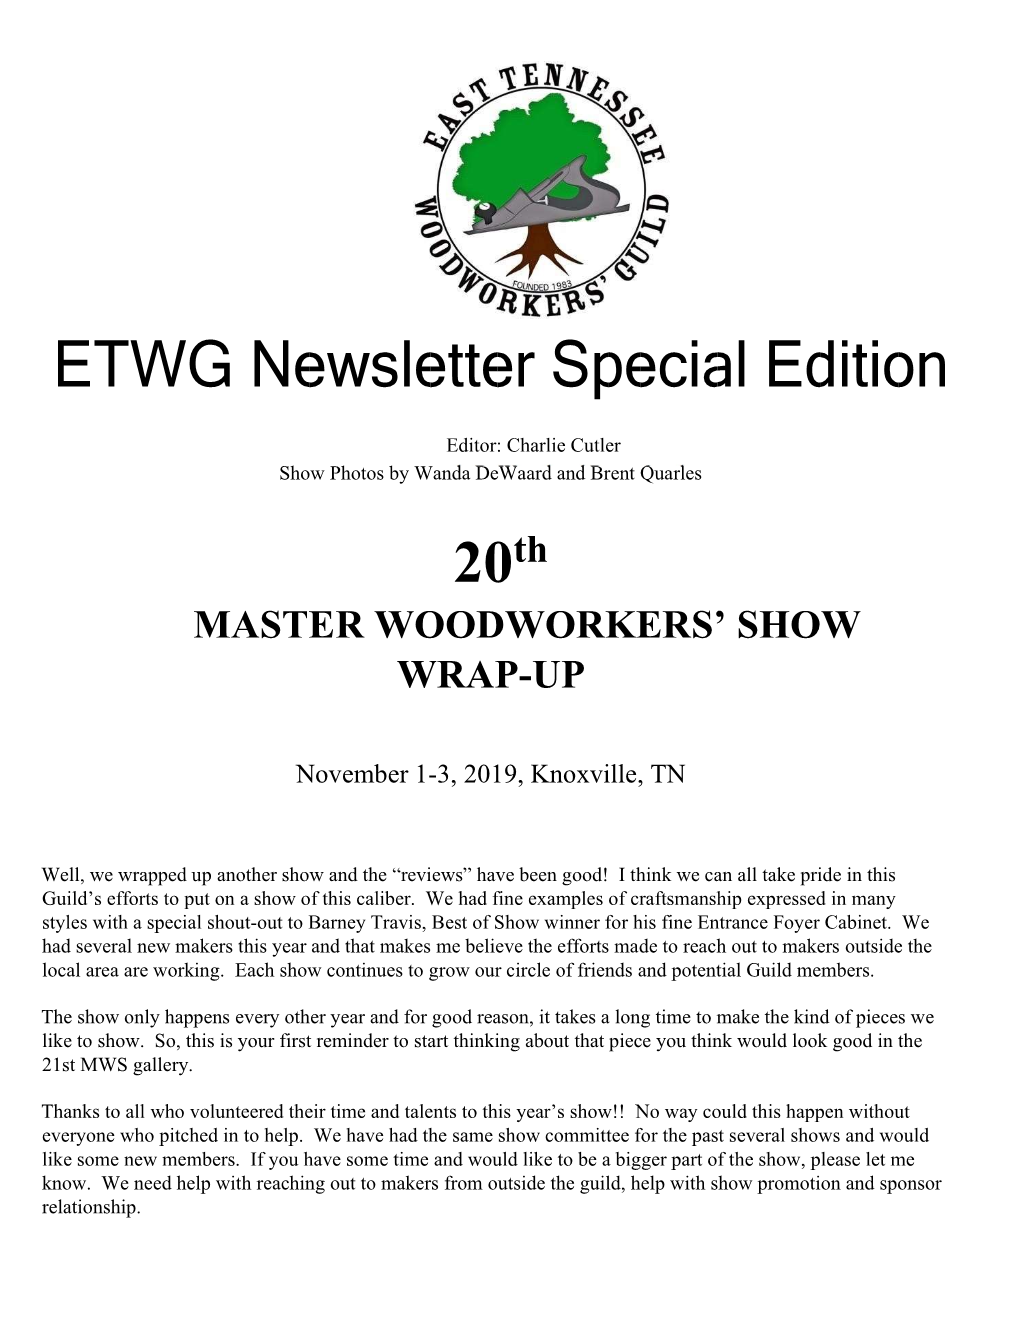 Master Woodworkers' Show Wrap-Up